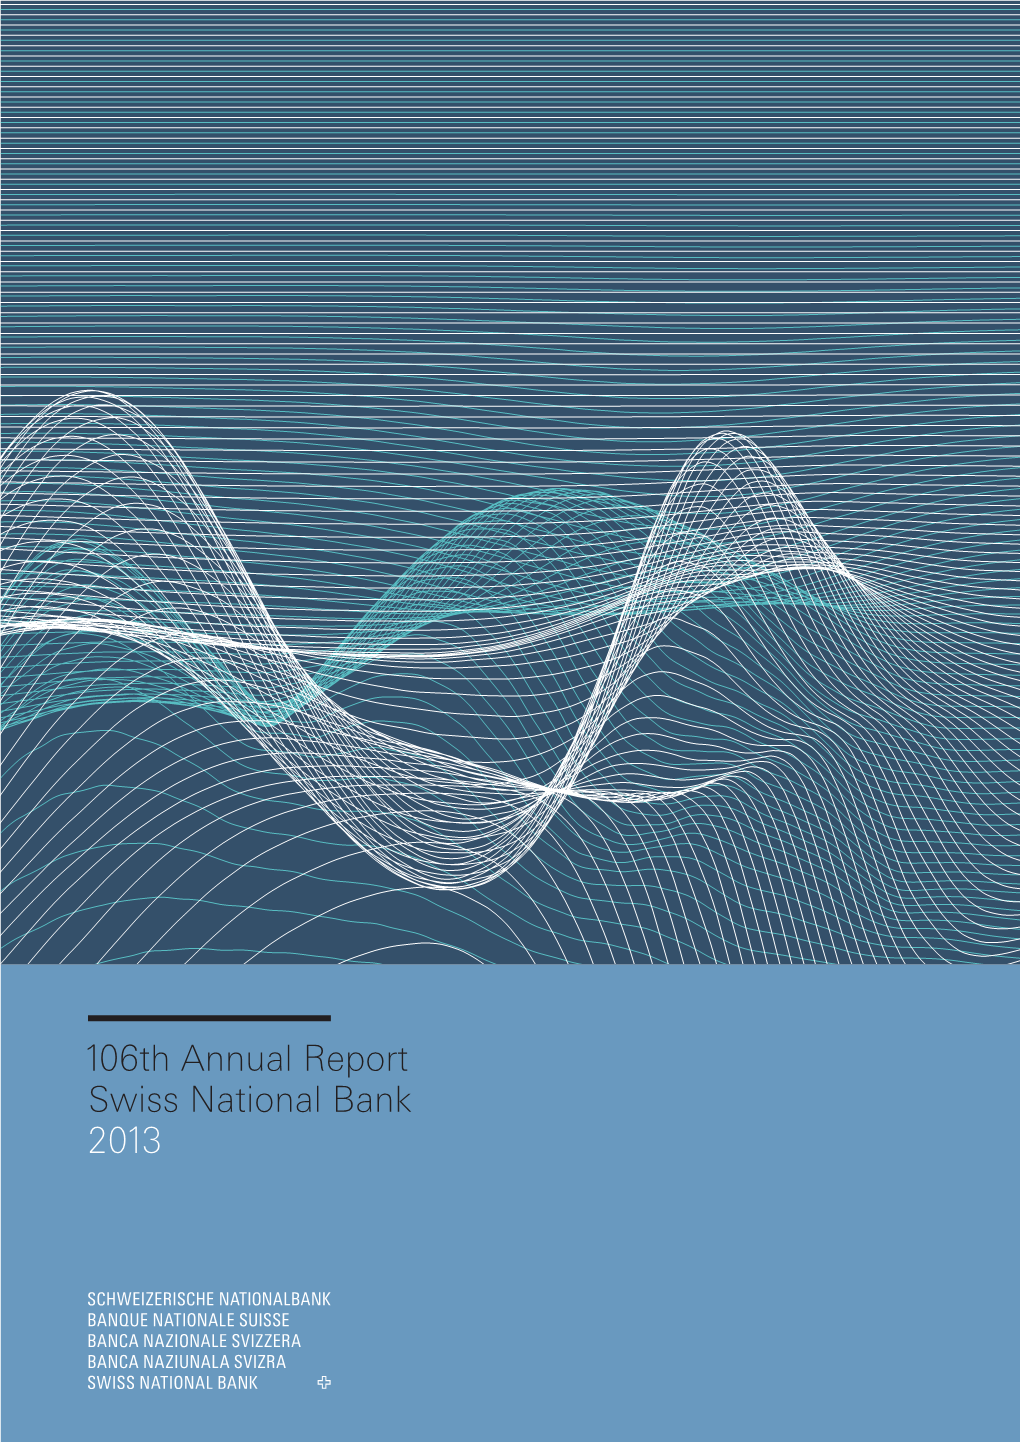 Swiss National Bank, 106Th Annual Report 2013